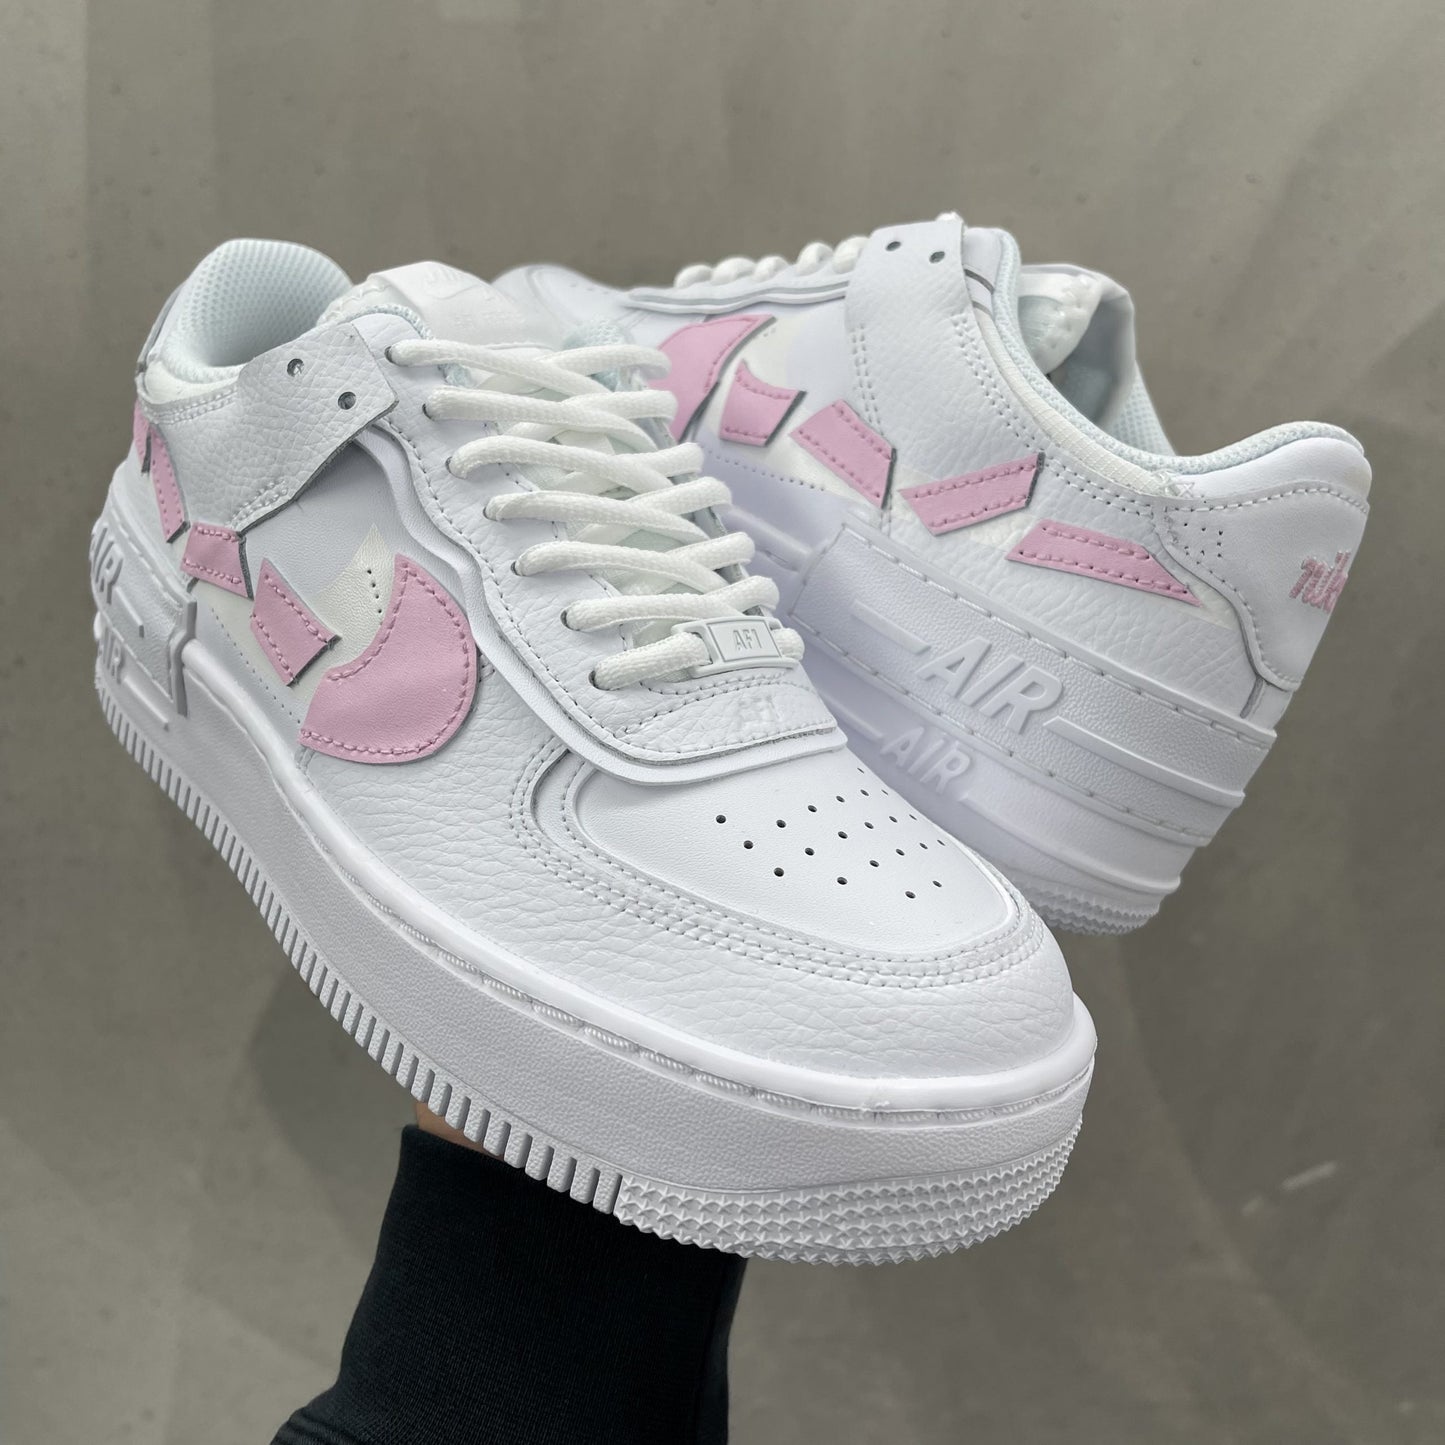 Custom AIR FORCE 1 shadow - Destroyed swooshes (pink)